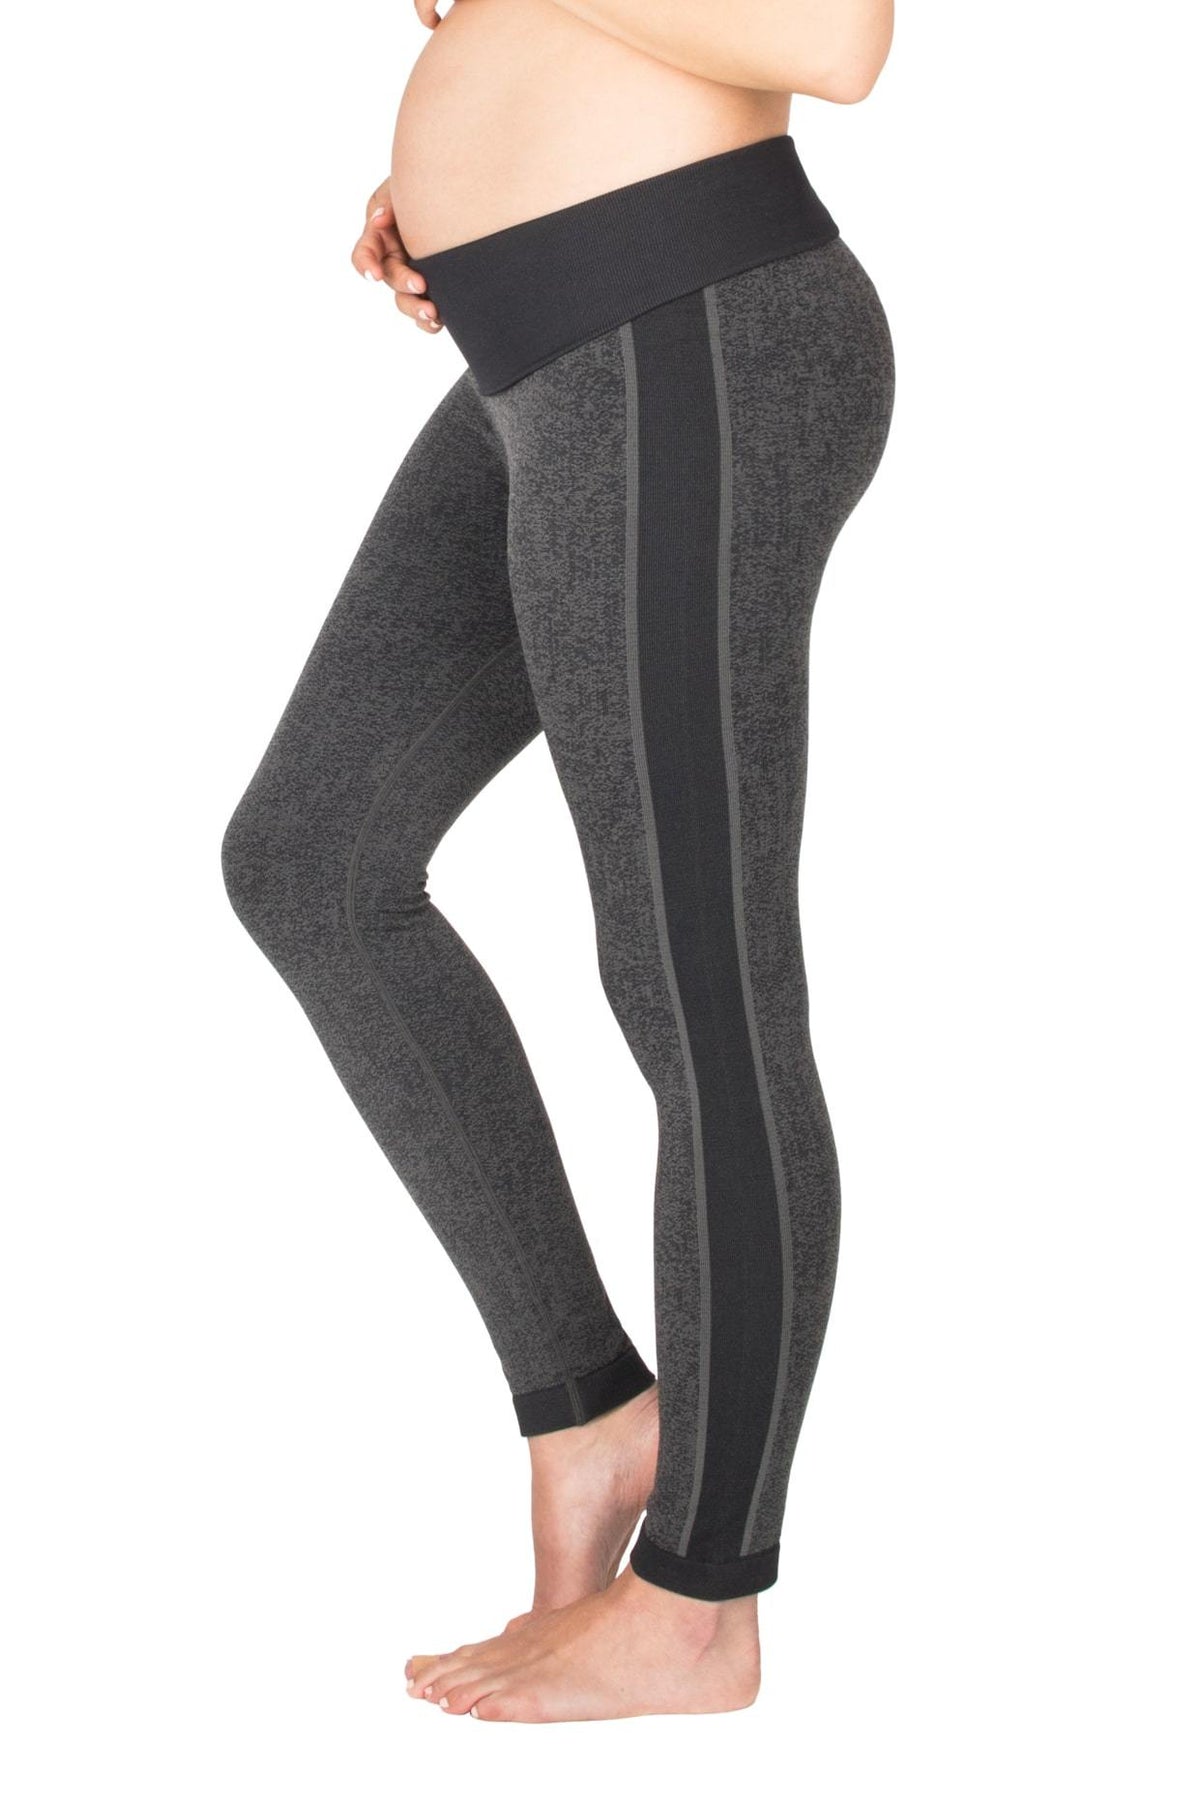 MIRITY Maternity Seamless Leggings Over The Belly Pregnancy